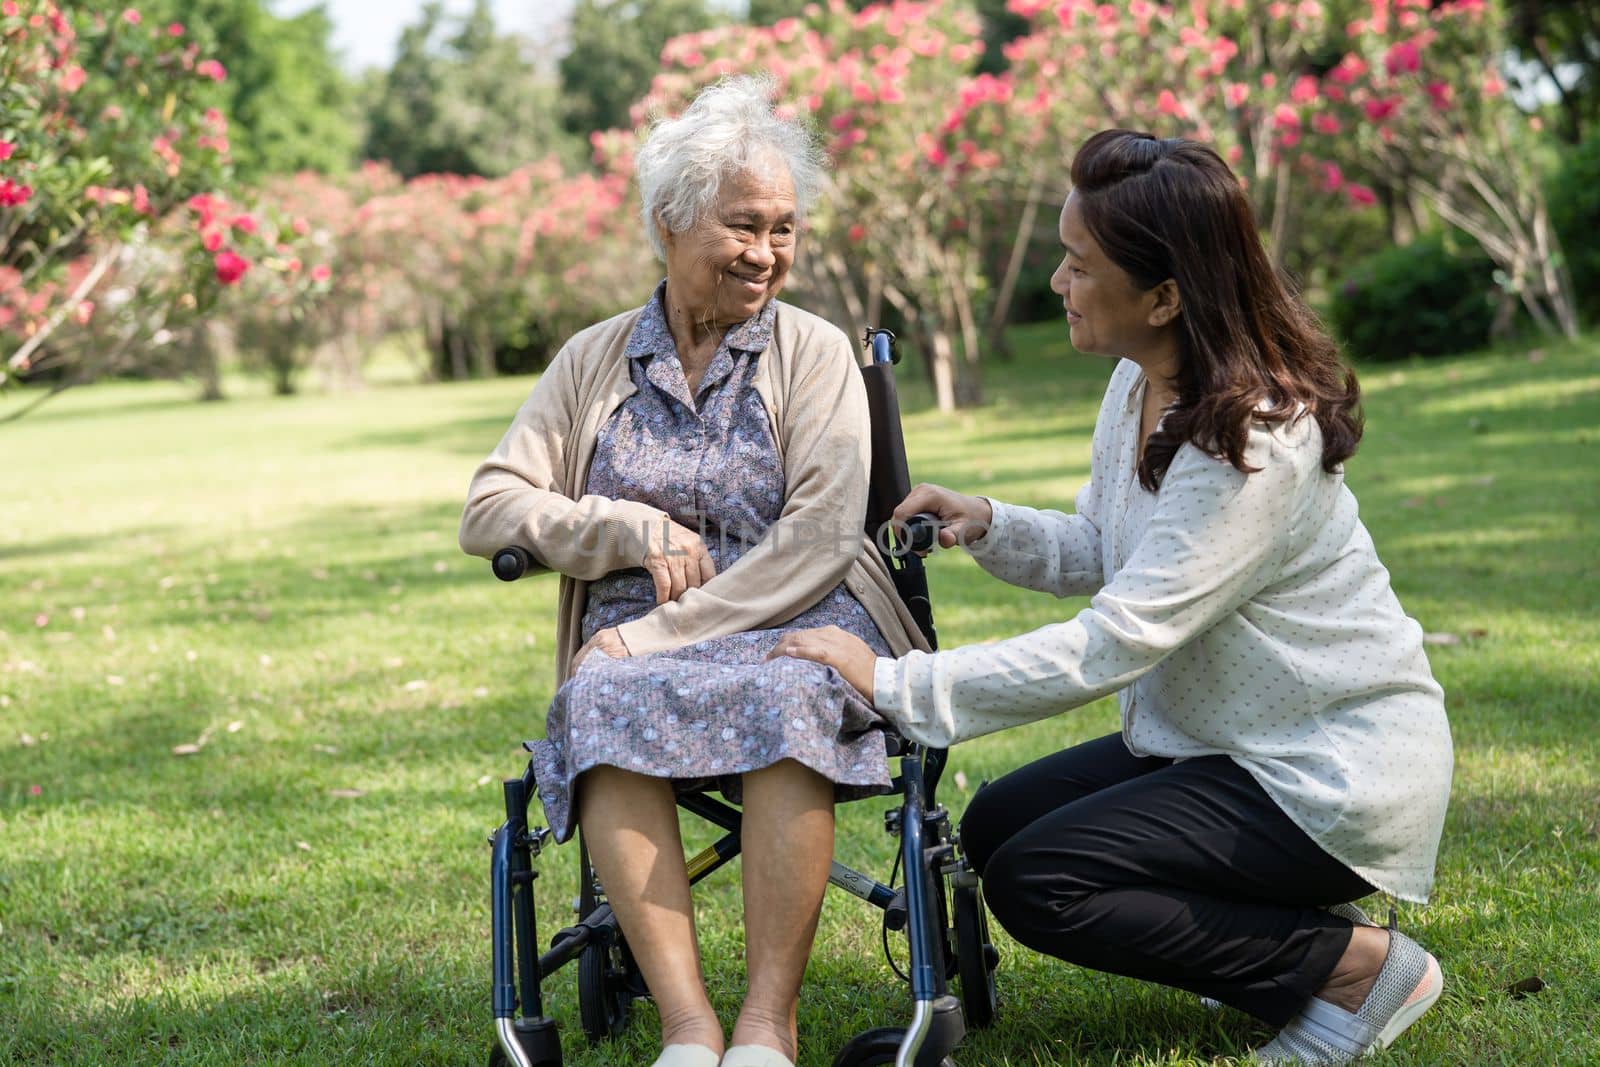 Caregiver help and care Asian senior or elderly old lady woman patient sitting on wheelchair in park, healthy strong medical concept.